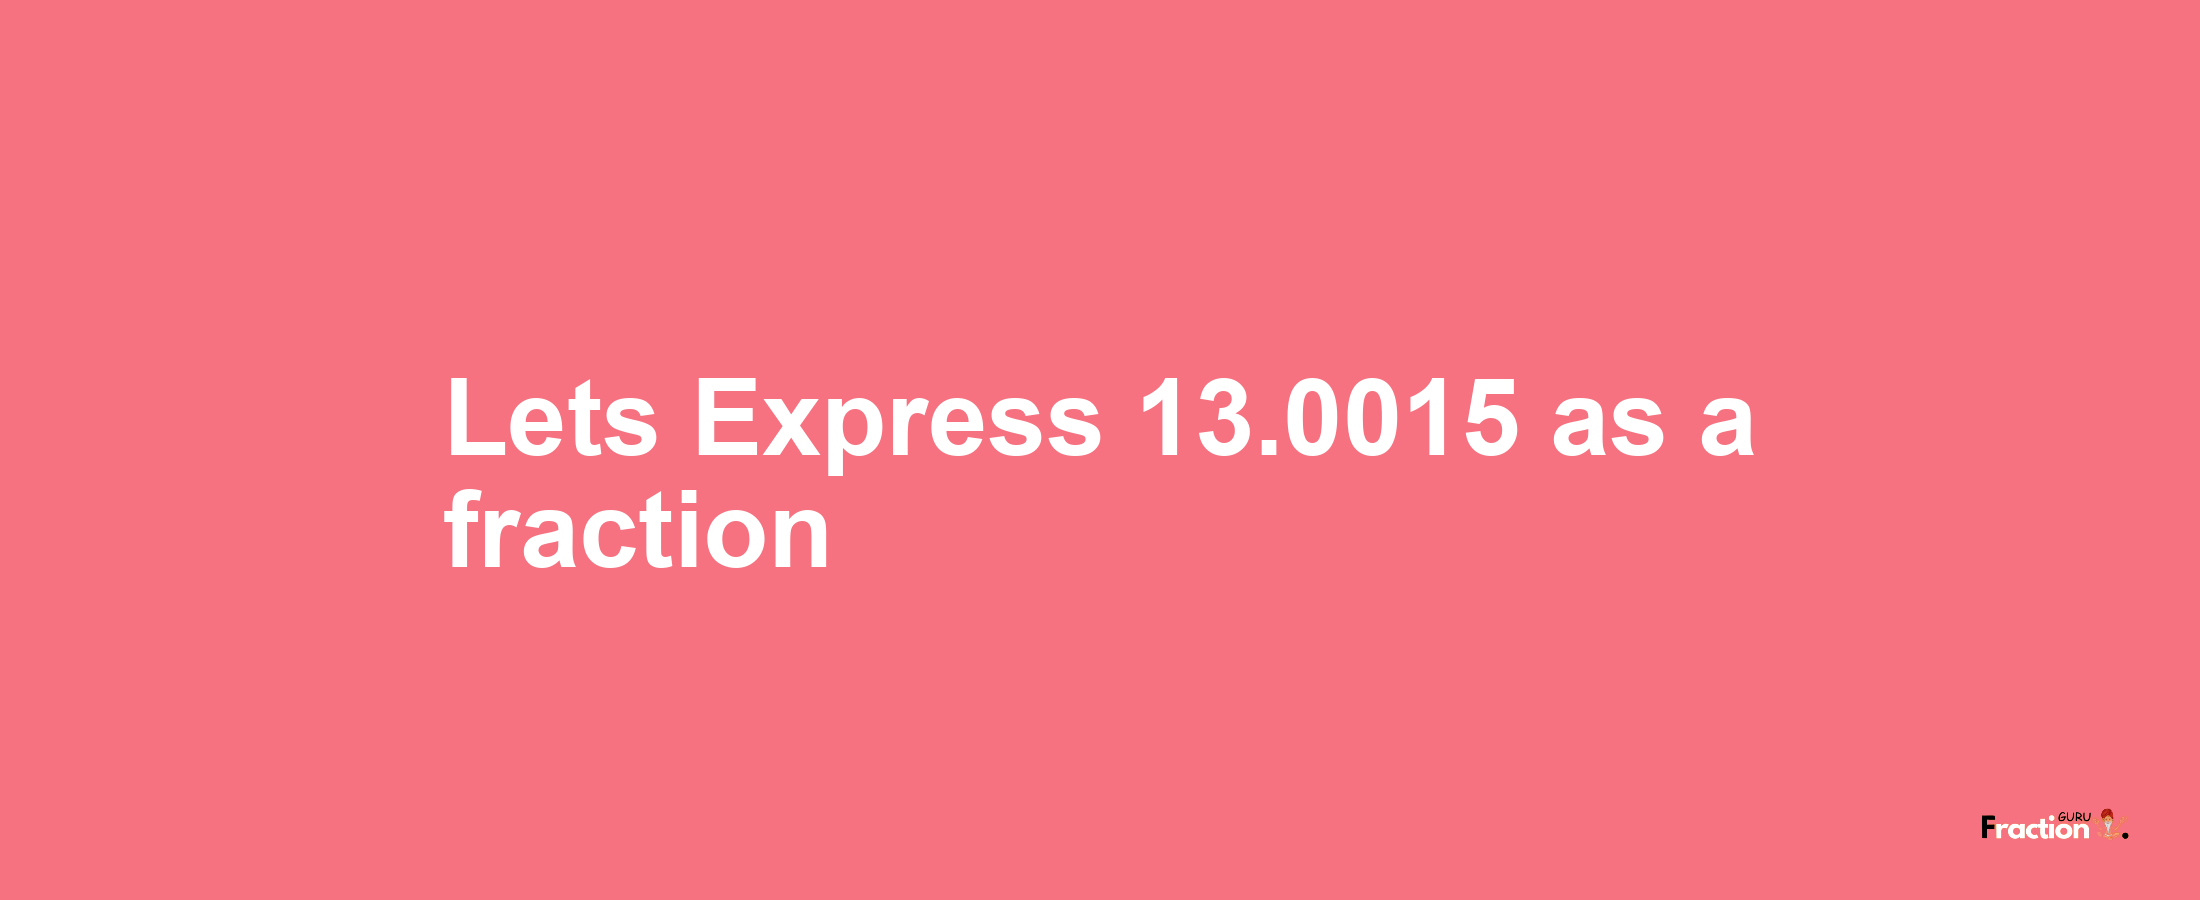 Lets Express 13.0015 as afraction